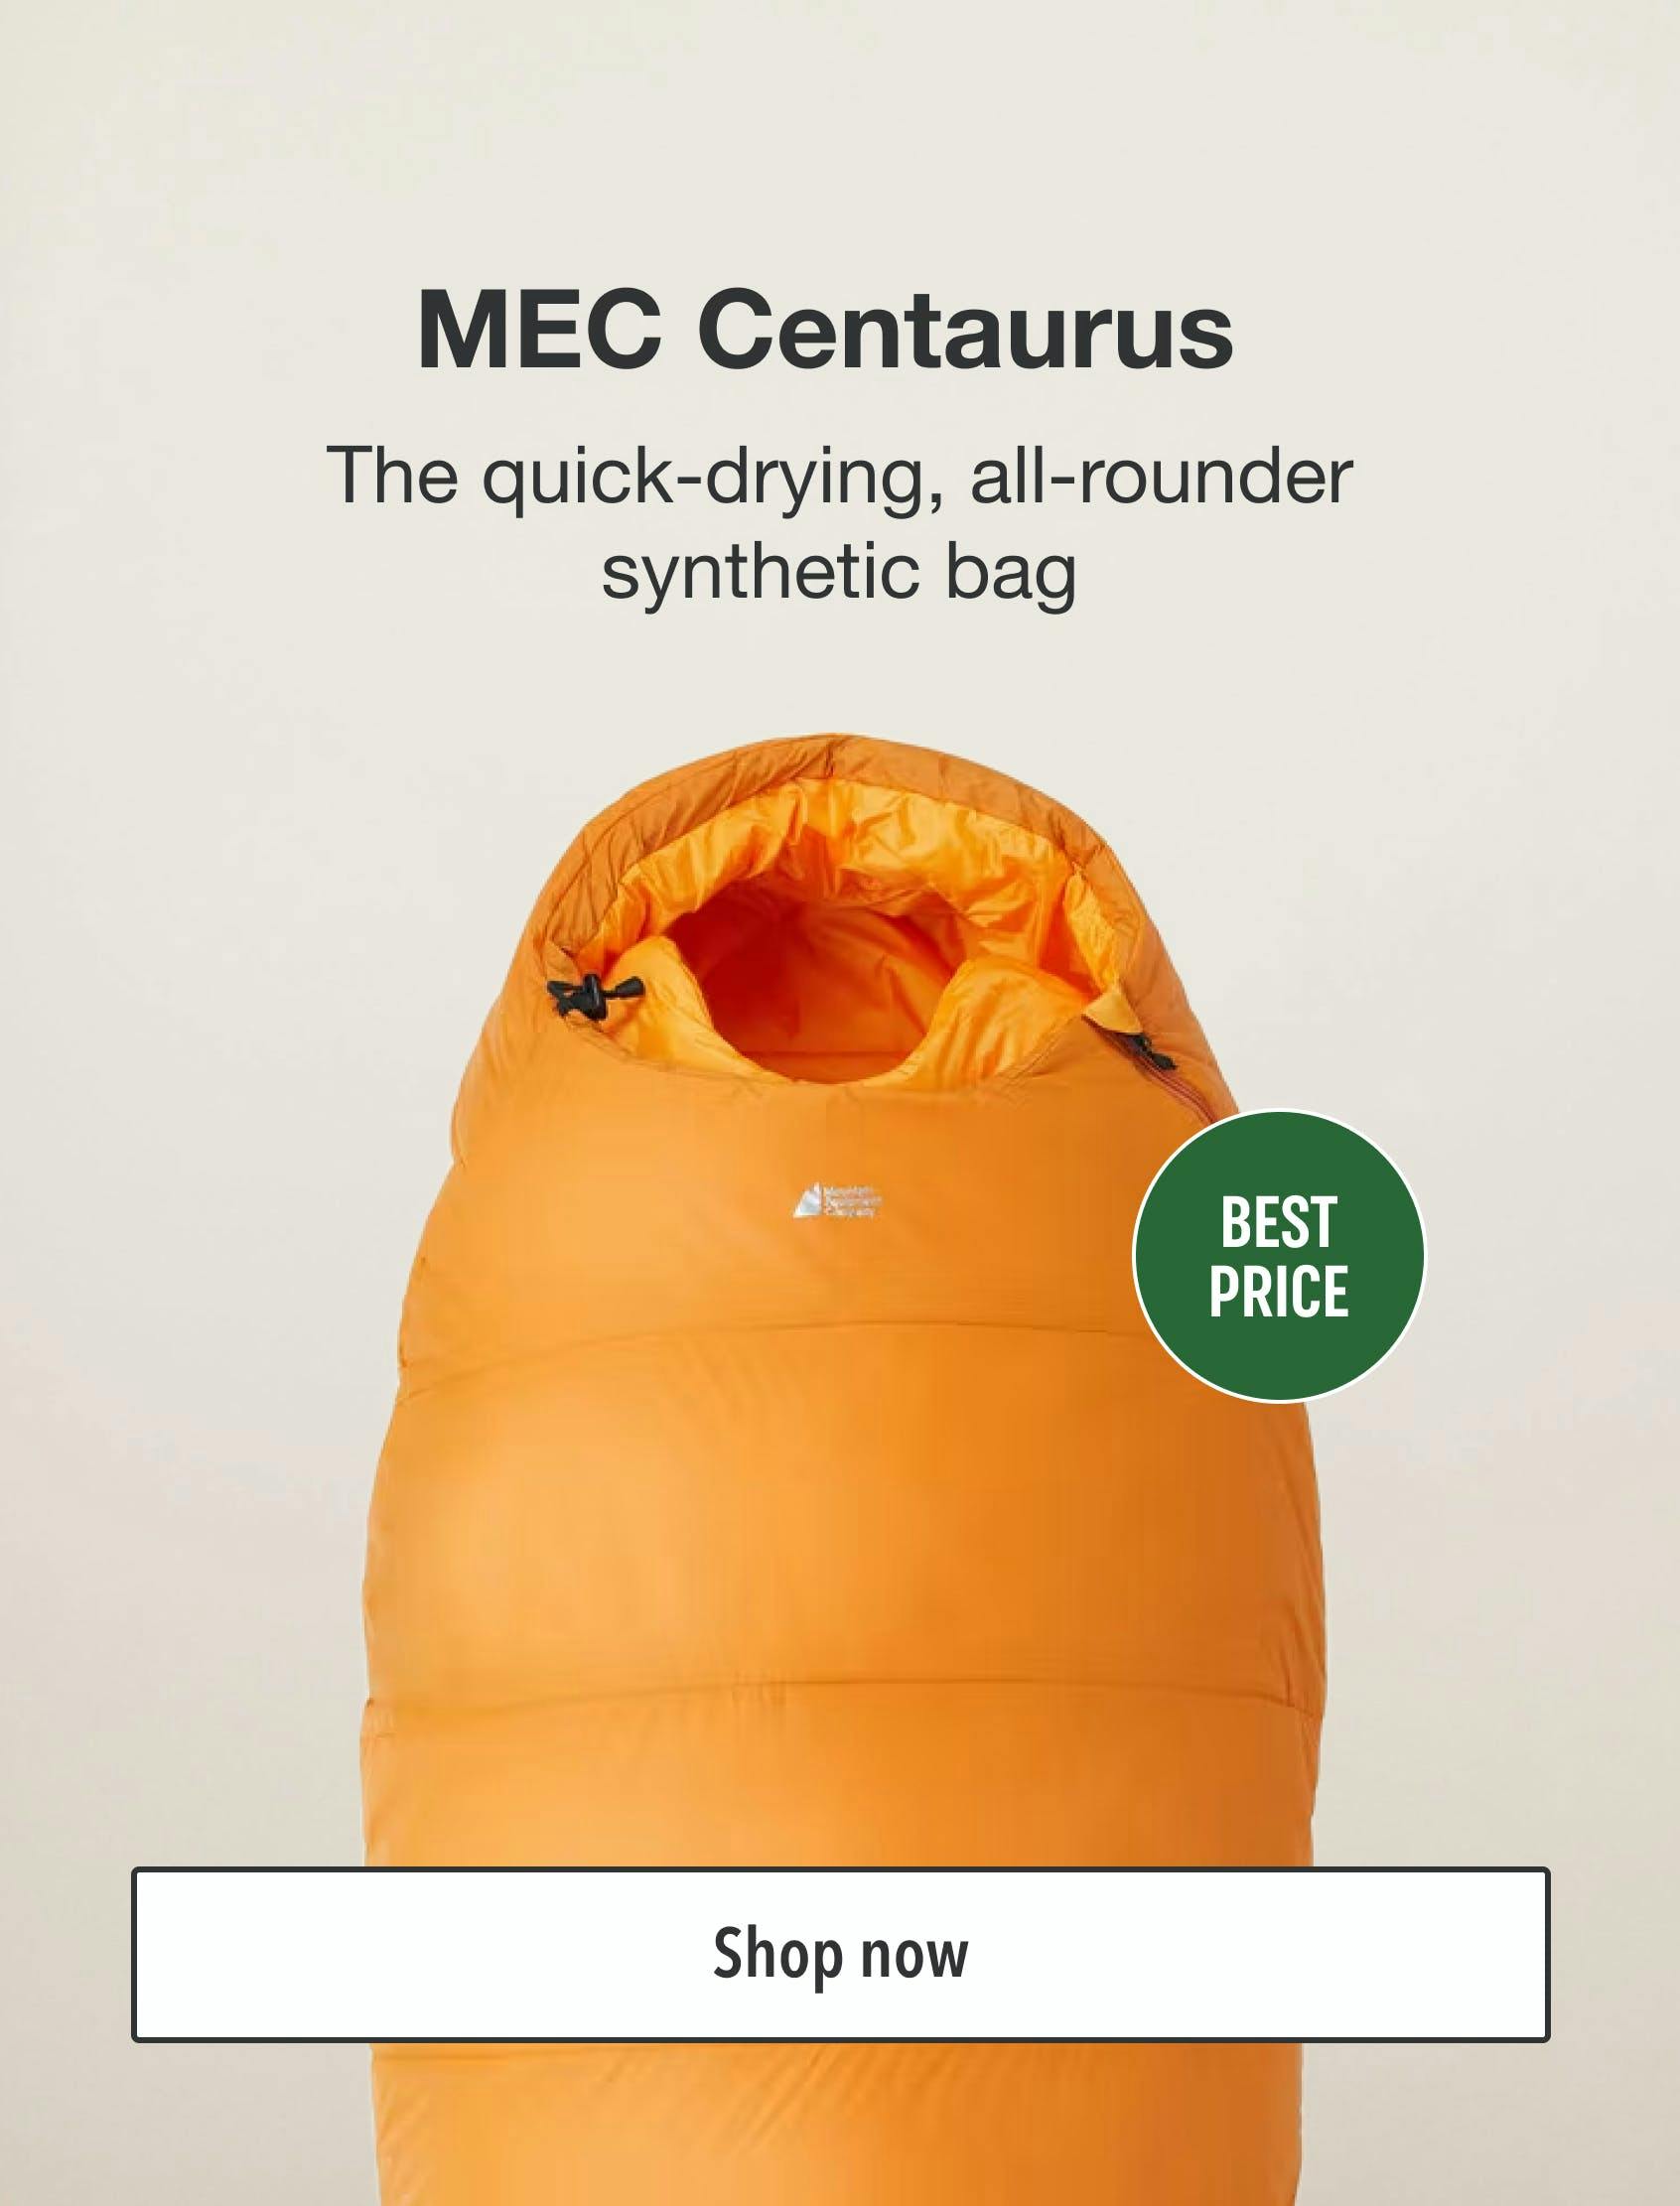 MEC Centaurus. The quick-drying, all-rounder synthetic bag